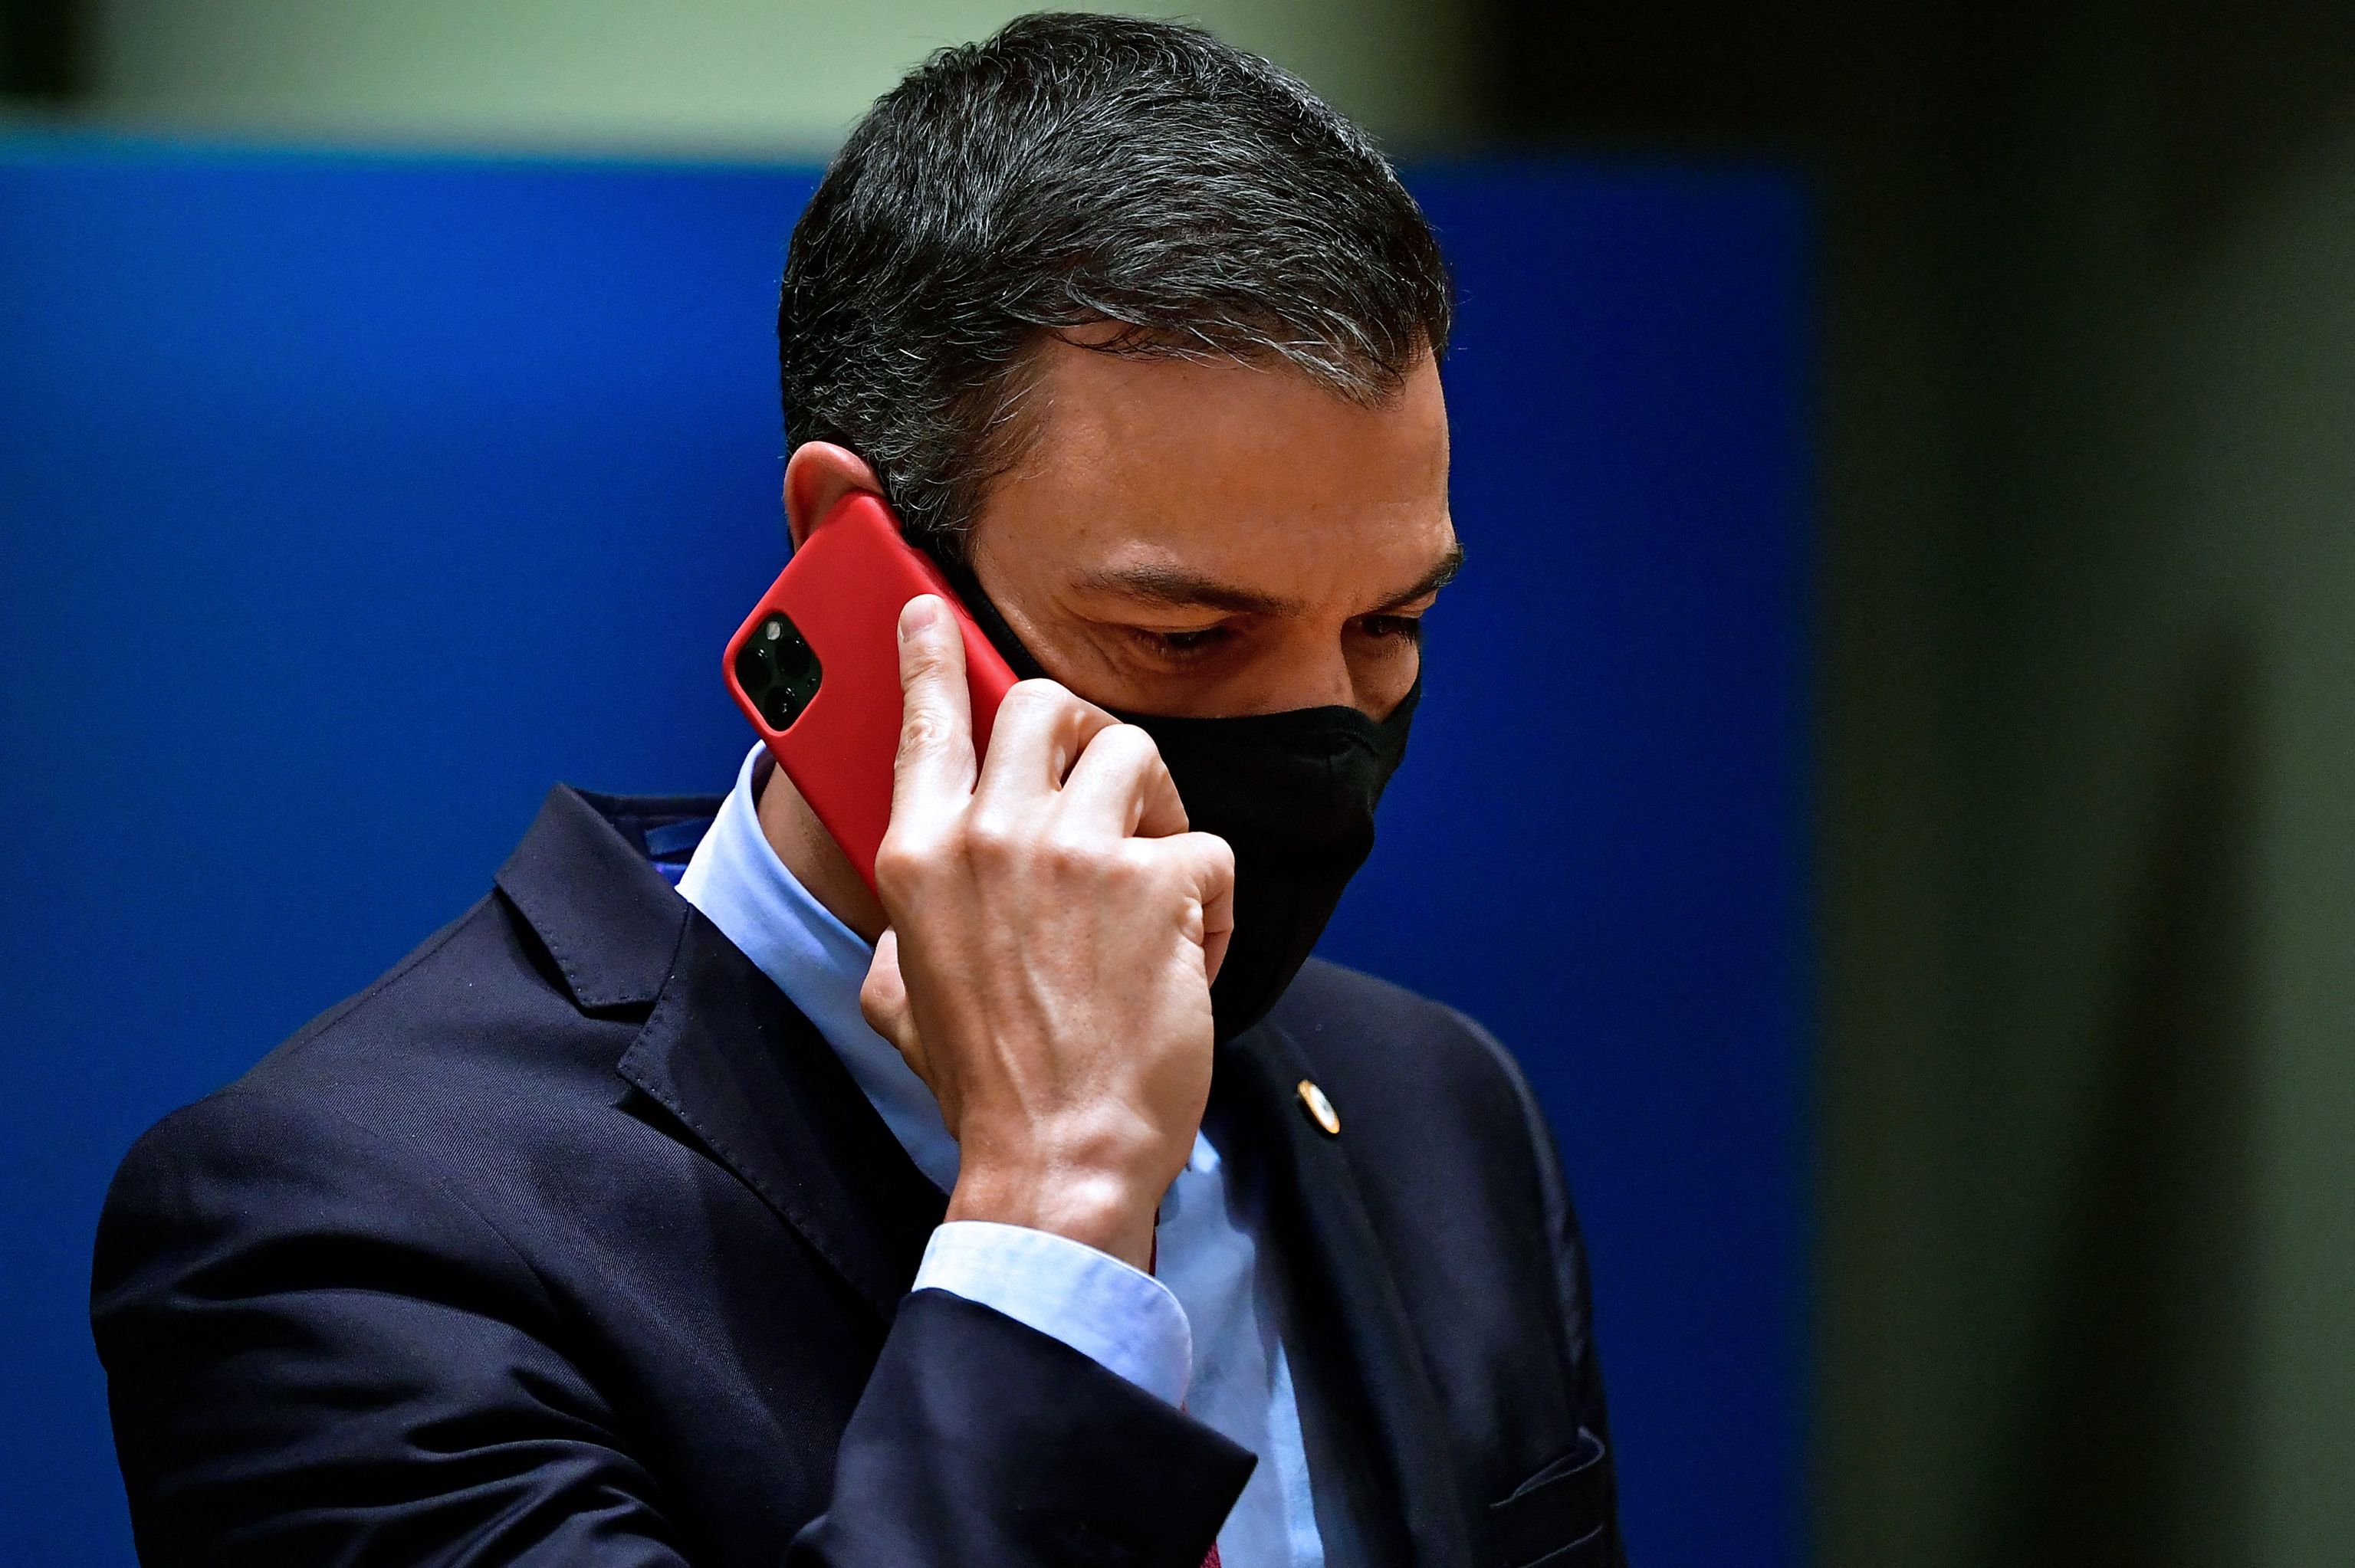 (FILES) In this file photo taken on July 20, 2020 Spain's Prime Minister  lt;HIT gt;Pedro lt;/HIT gt;  lt;HIT gt;Sanchez lt;/HIT gt; phones during an EU summit in Brussels. - Spain said on May 2, 2022 that the mobile phones of Prime Minister  lt;HIT gt;Pedro lt;/HIT gt;  lt;HIT gt;Sanchez lt;/HIT gt; and Defence Minister Margarita Robles were tapped using Pegasus spyware in an "illicit and external" intervention. (Photo by JOHN THYS / POOL / AFP)